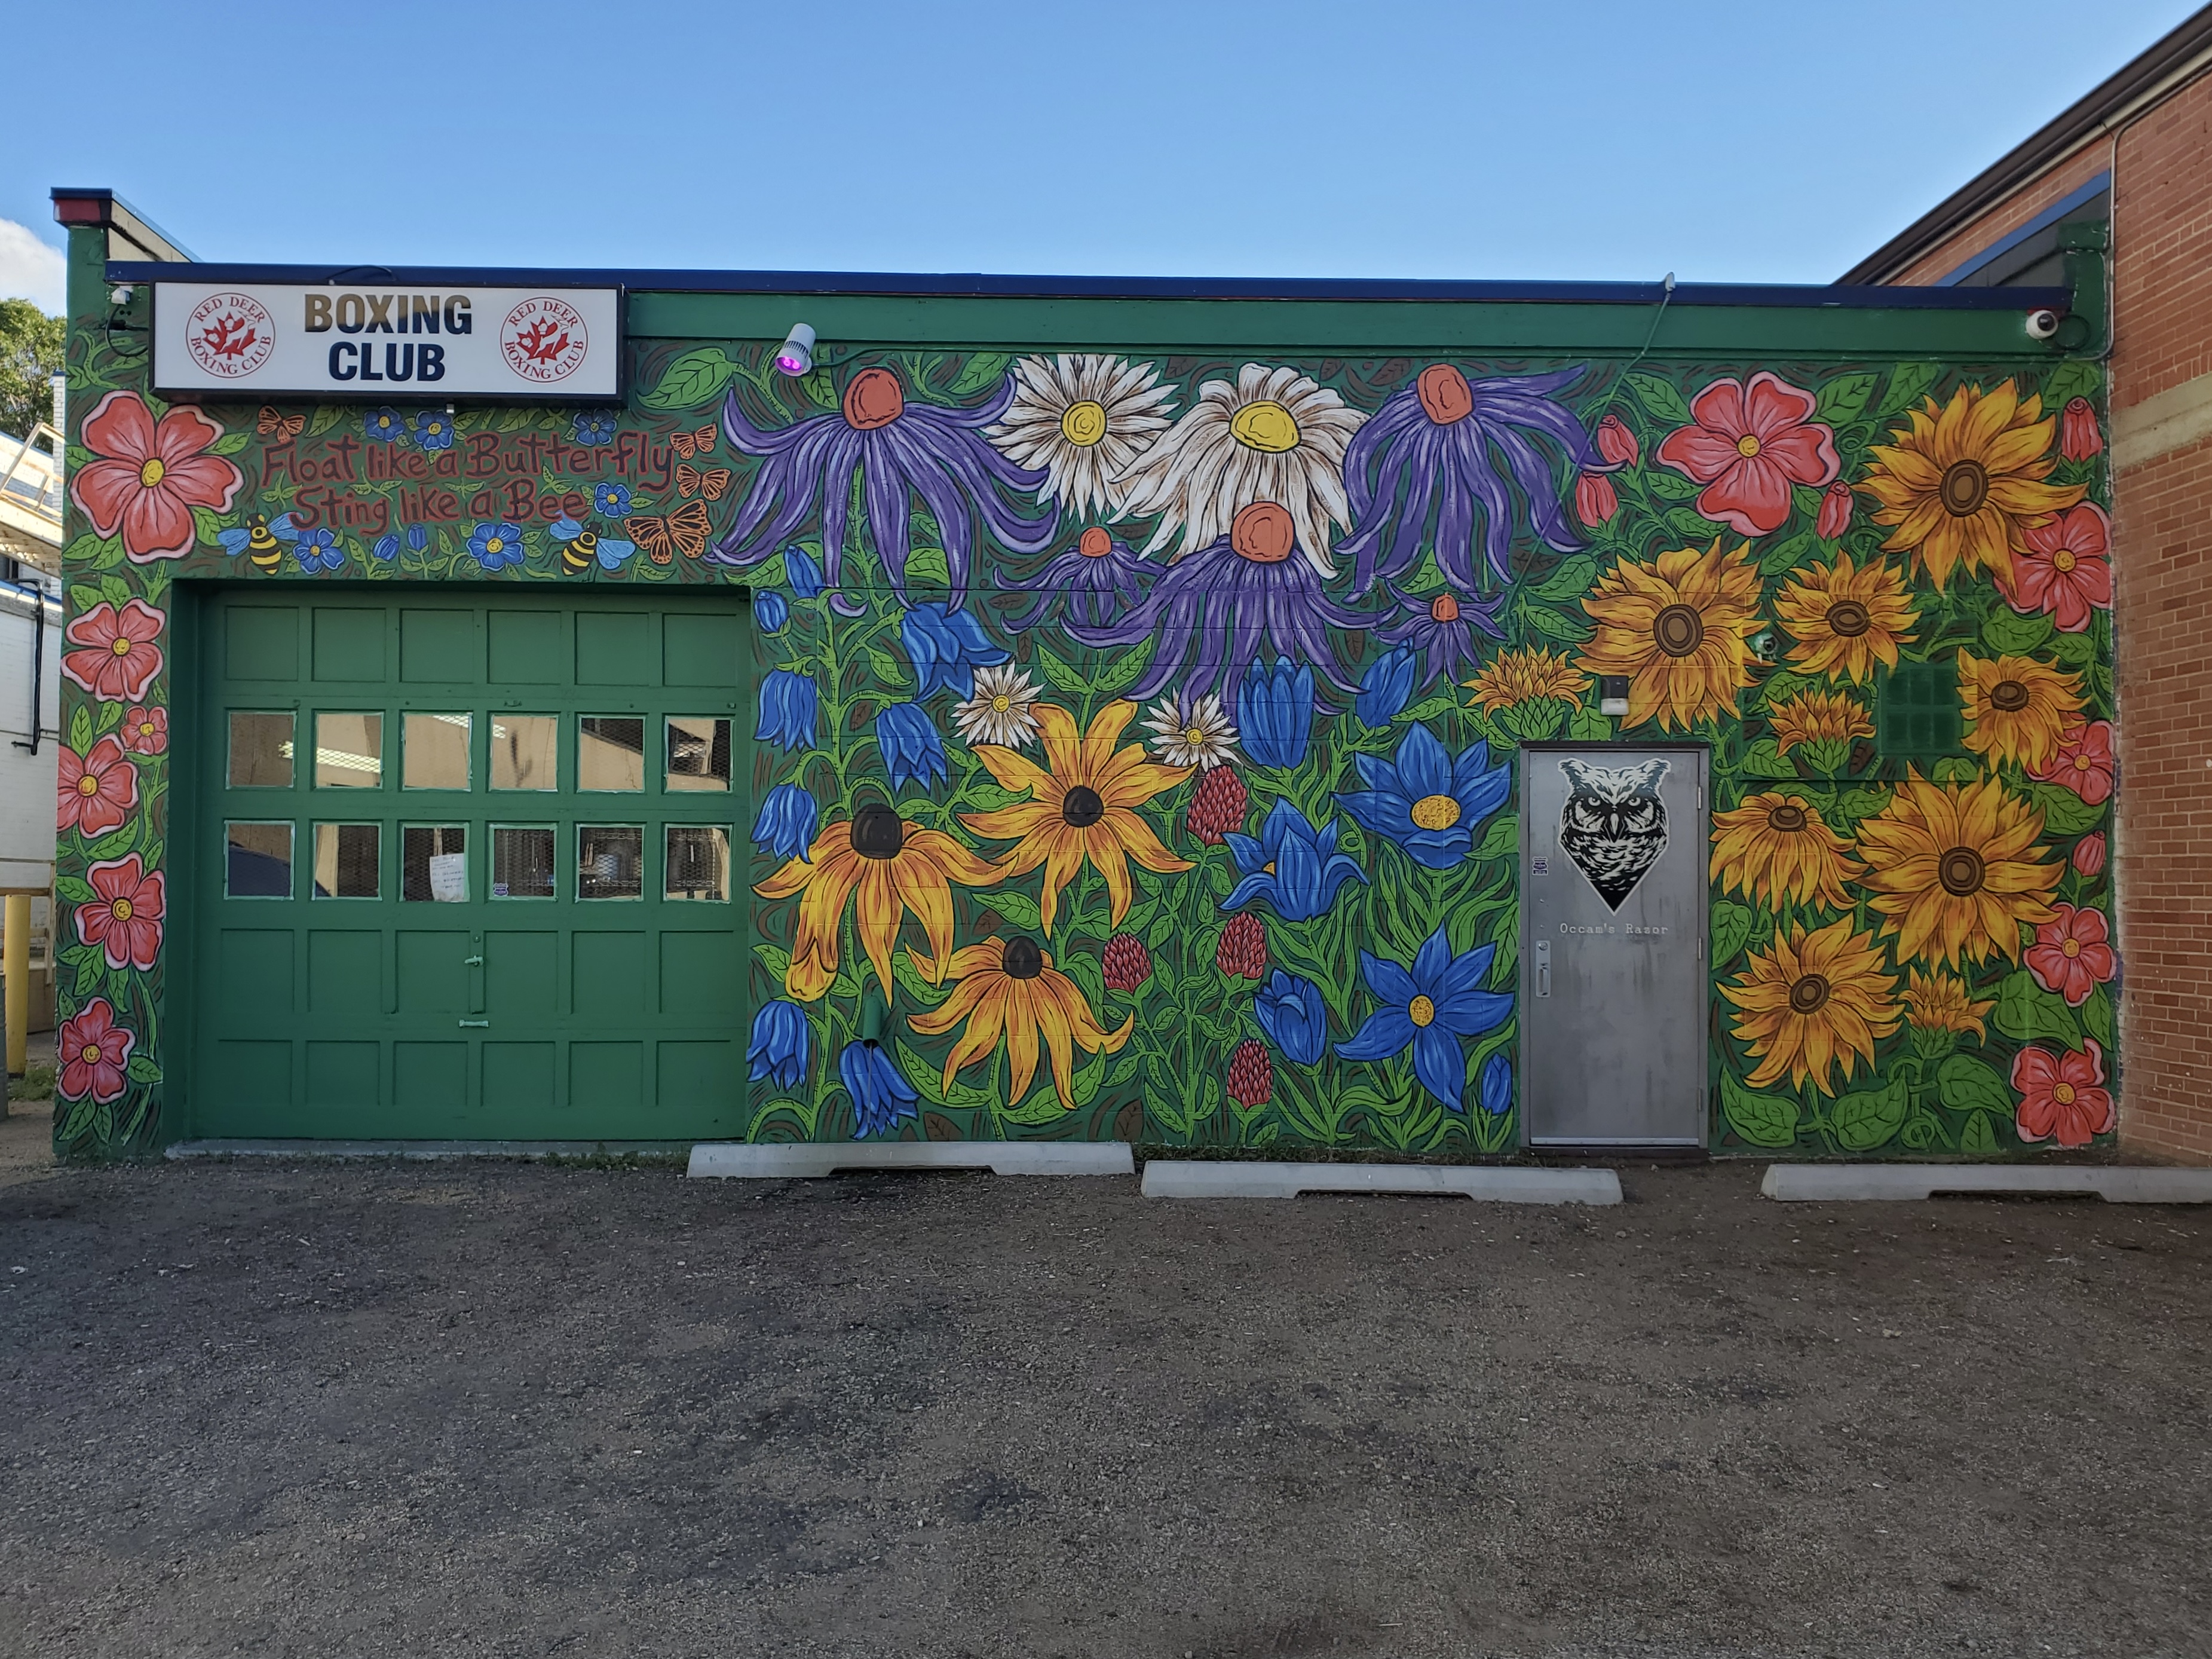 Large colourful flower mural on the building for a boxing club. In the top left corner, a quote reads "float like a butterfly sting like a bee"